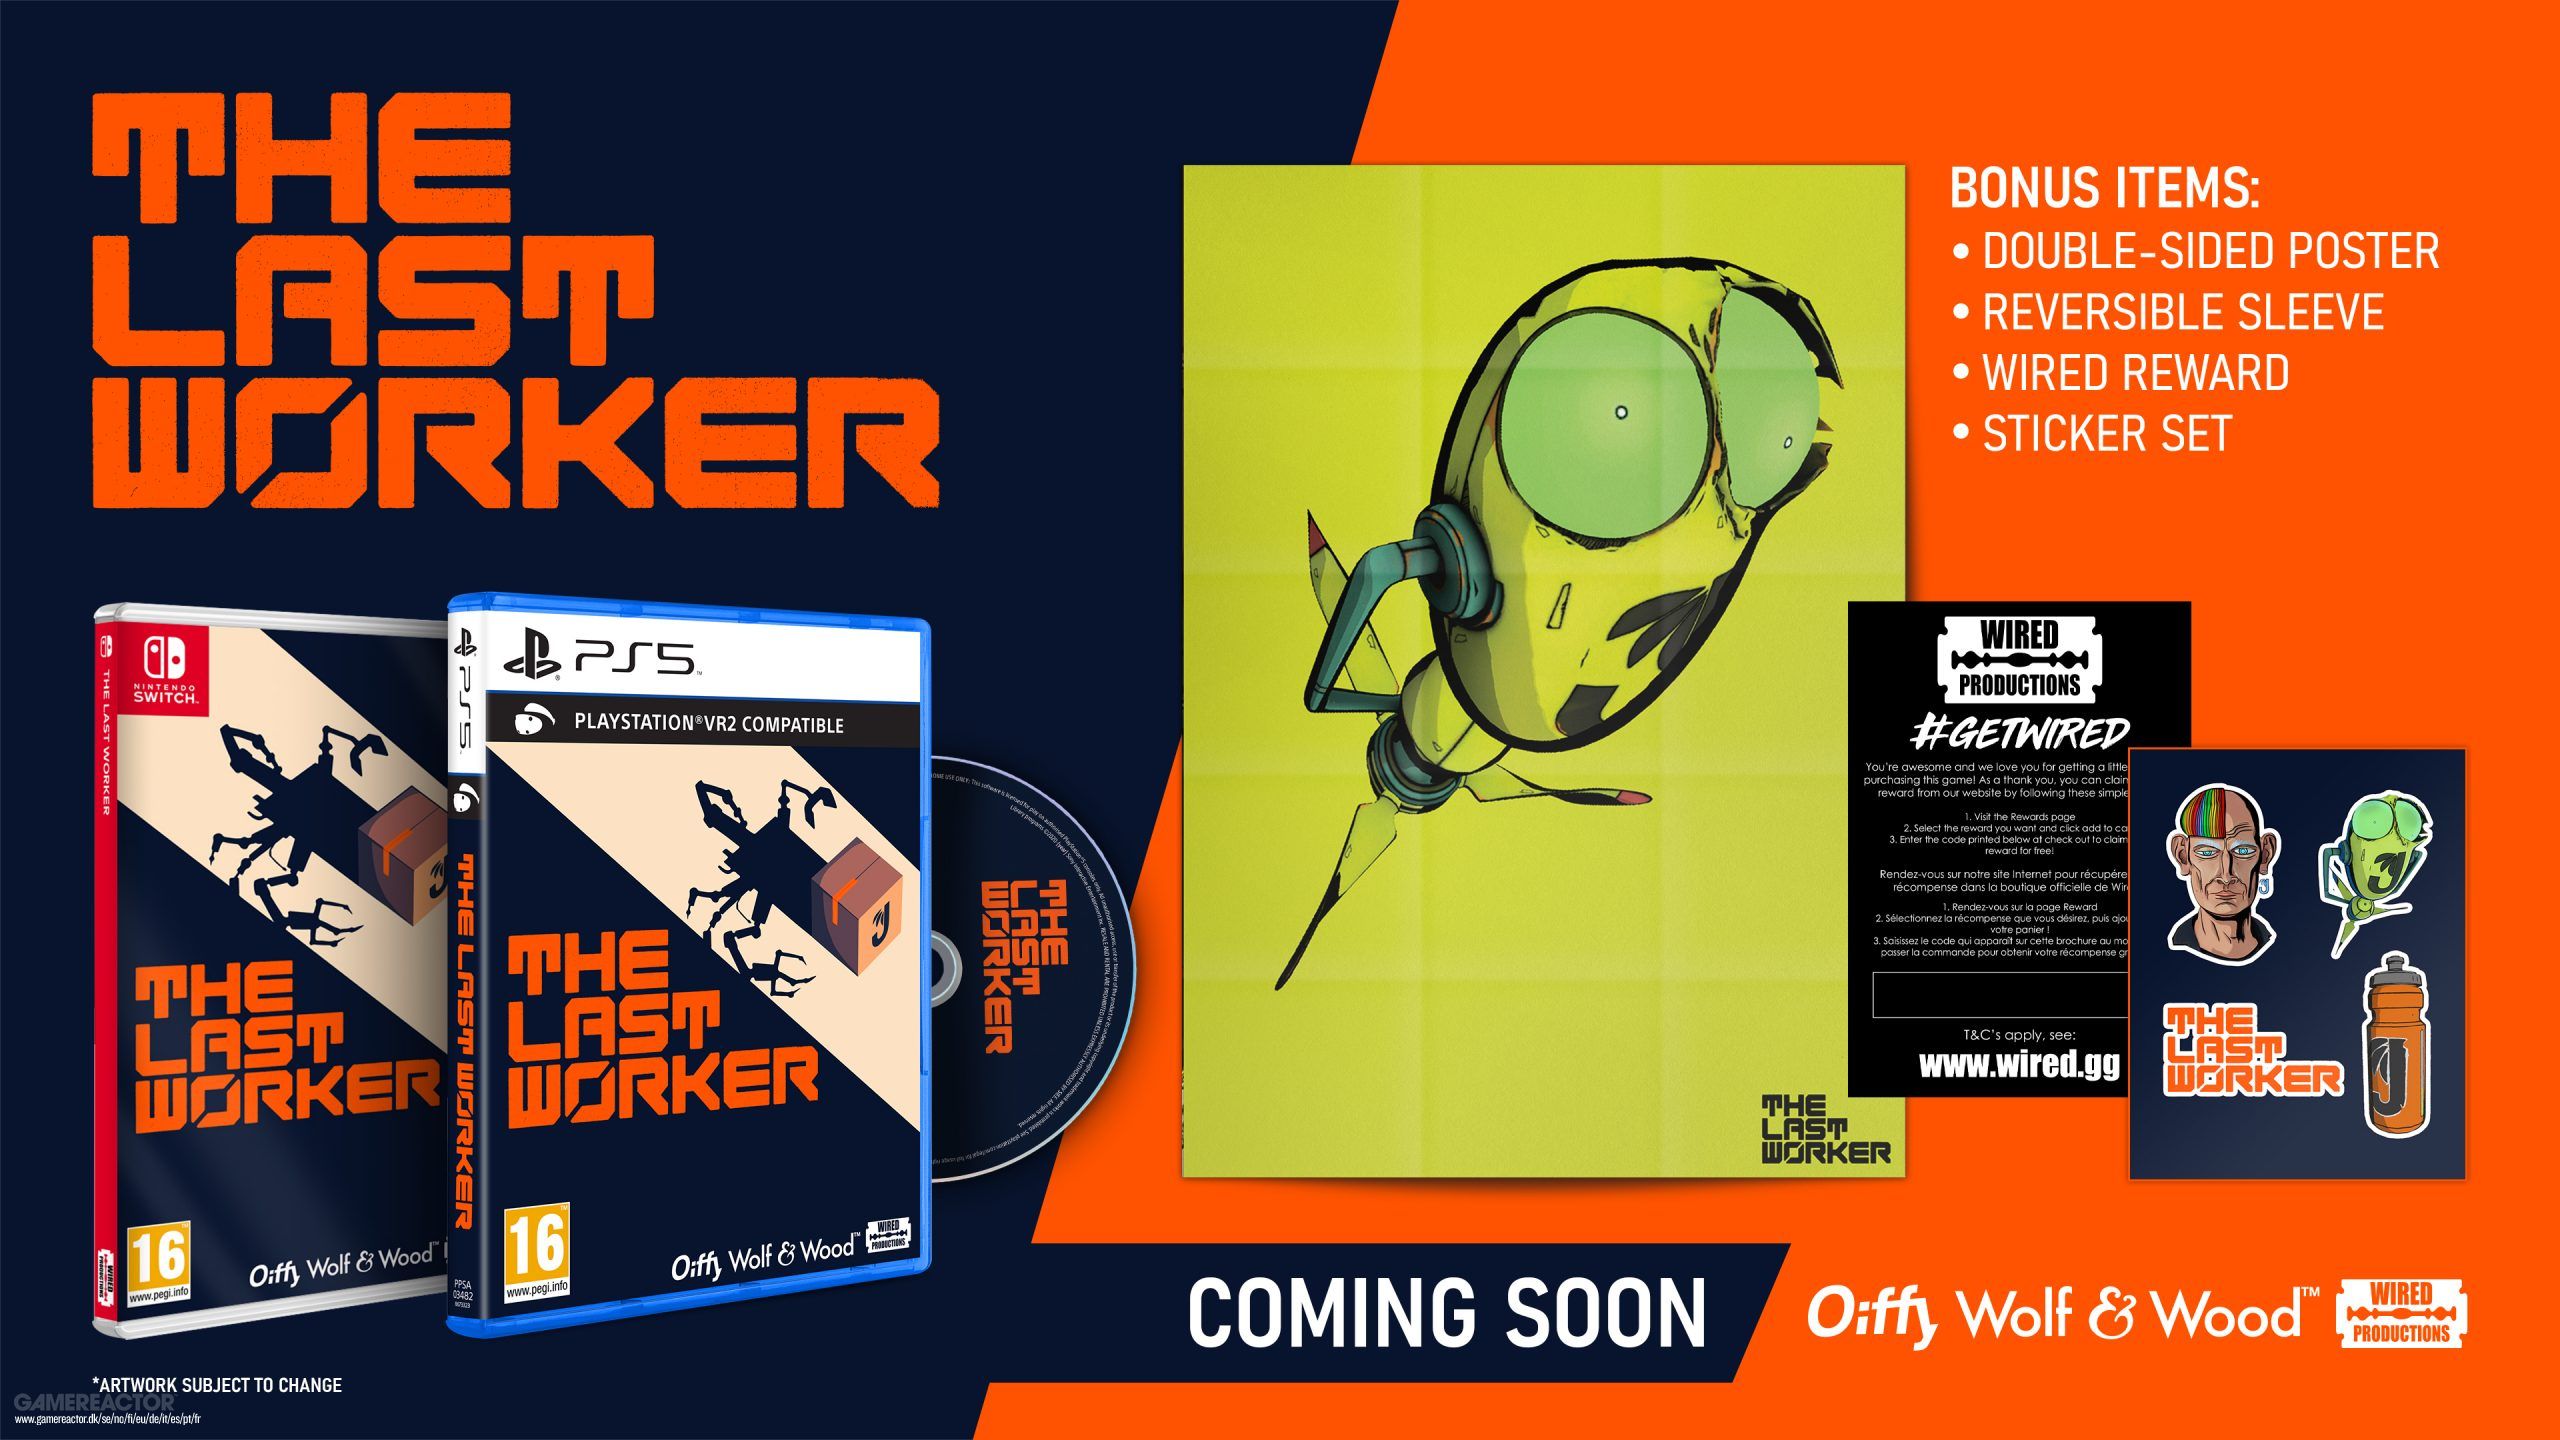 The Solitude of The Last Worker is coming in March with a physical edition on PS5, PS VR2 and Nintendo Switch